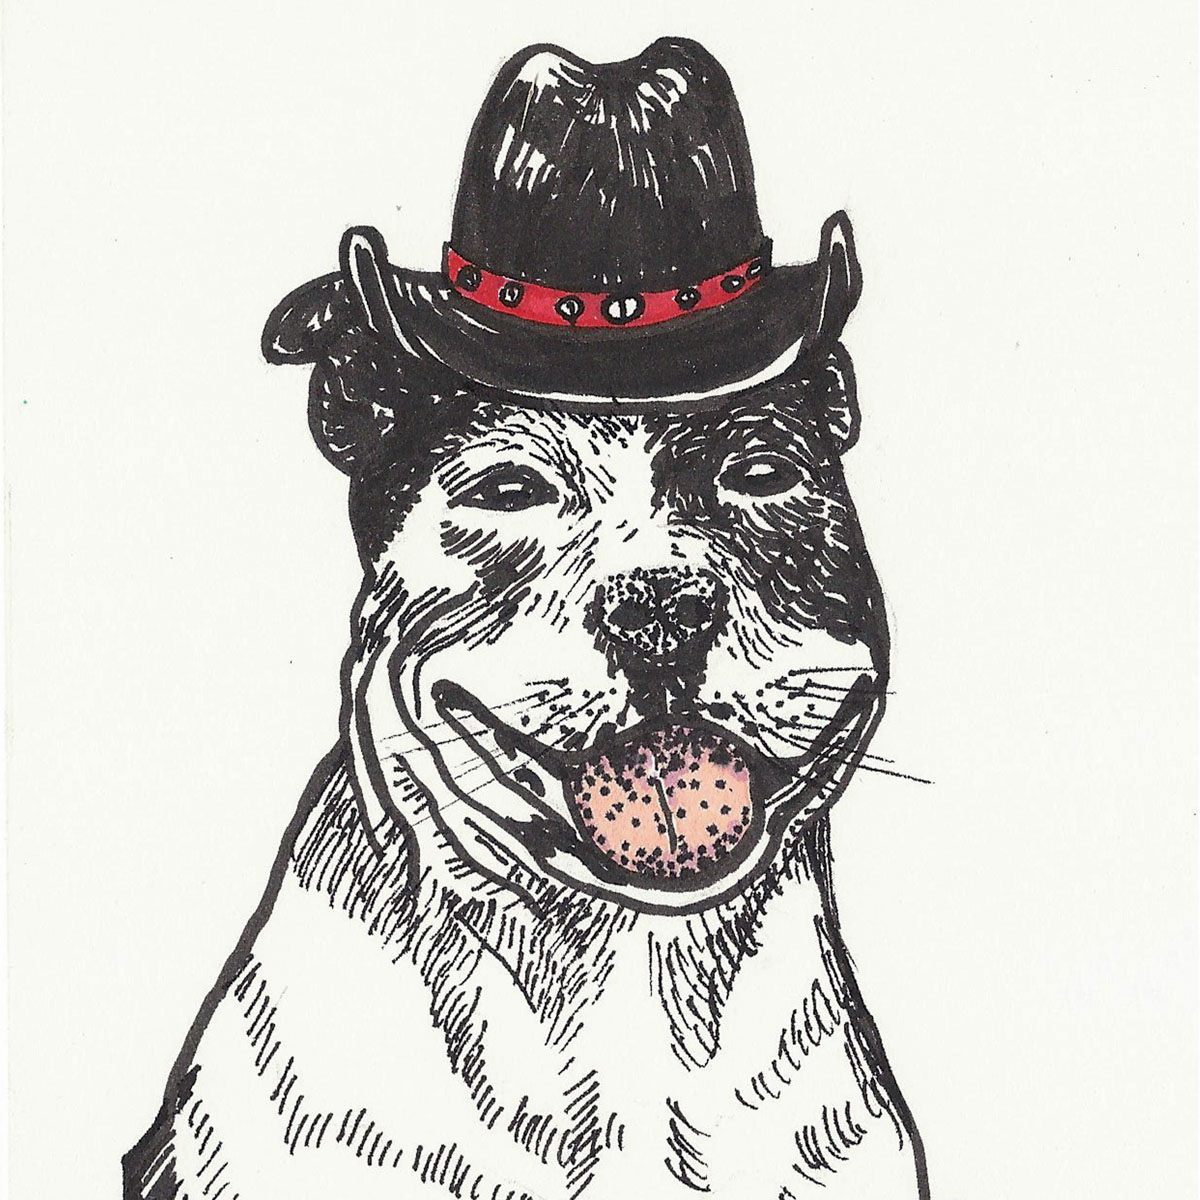 Ink drawing of staffy in a hat - Capricorn Coast Art - Barbara Price Rees